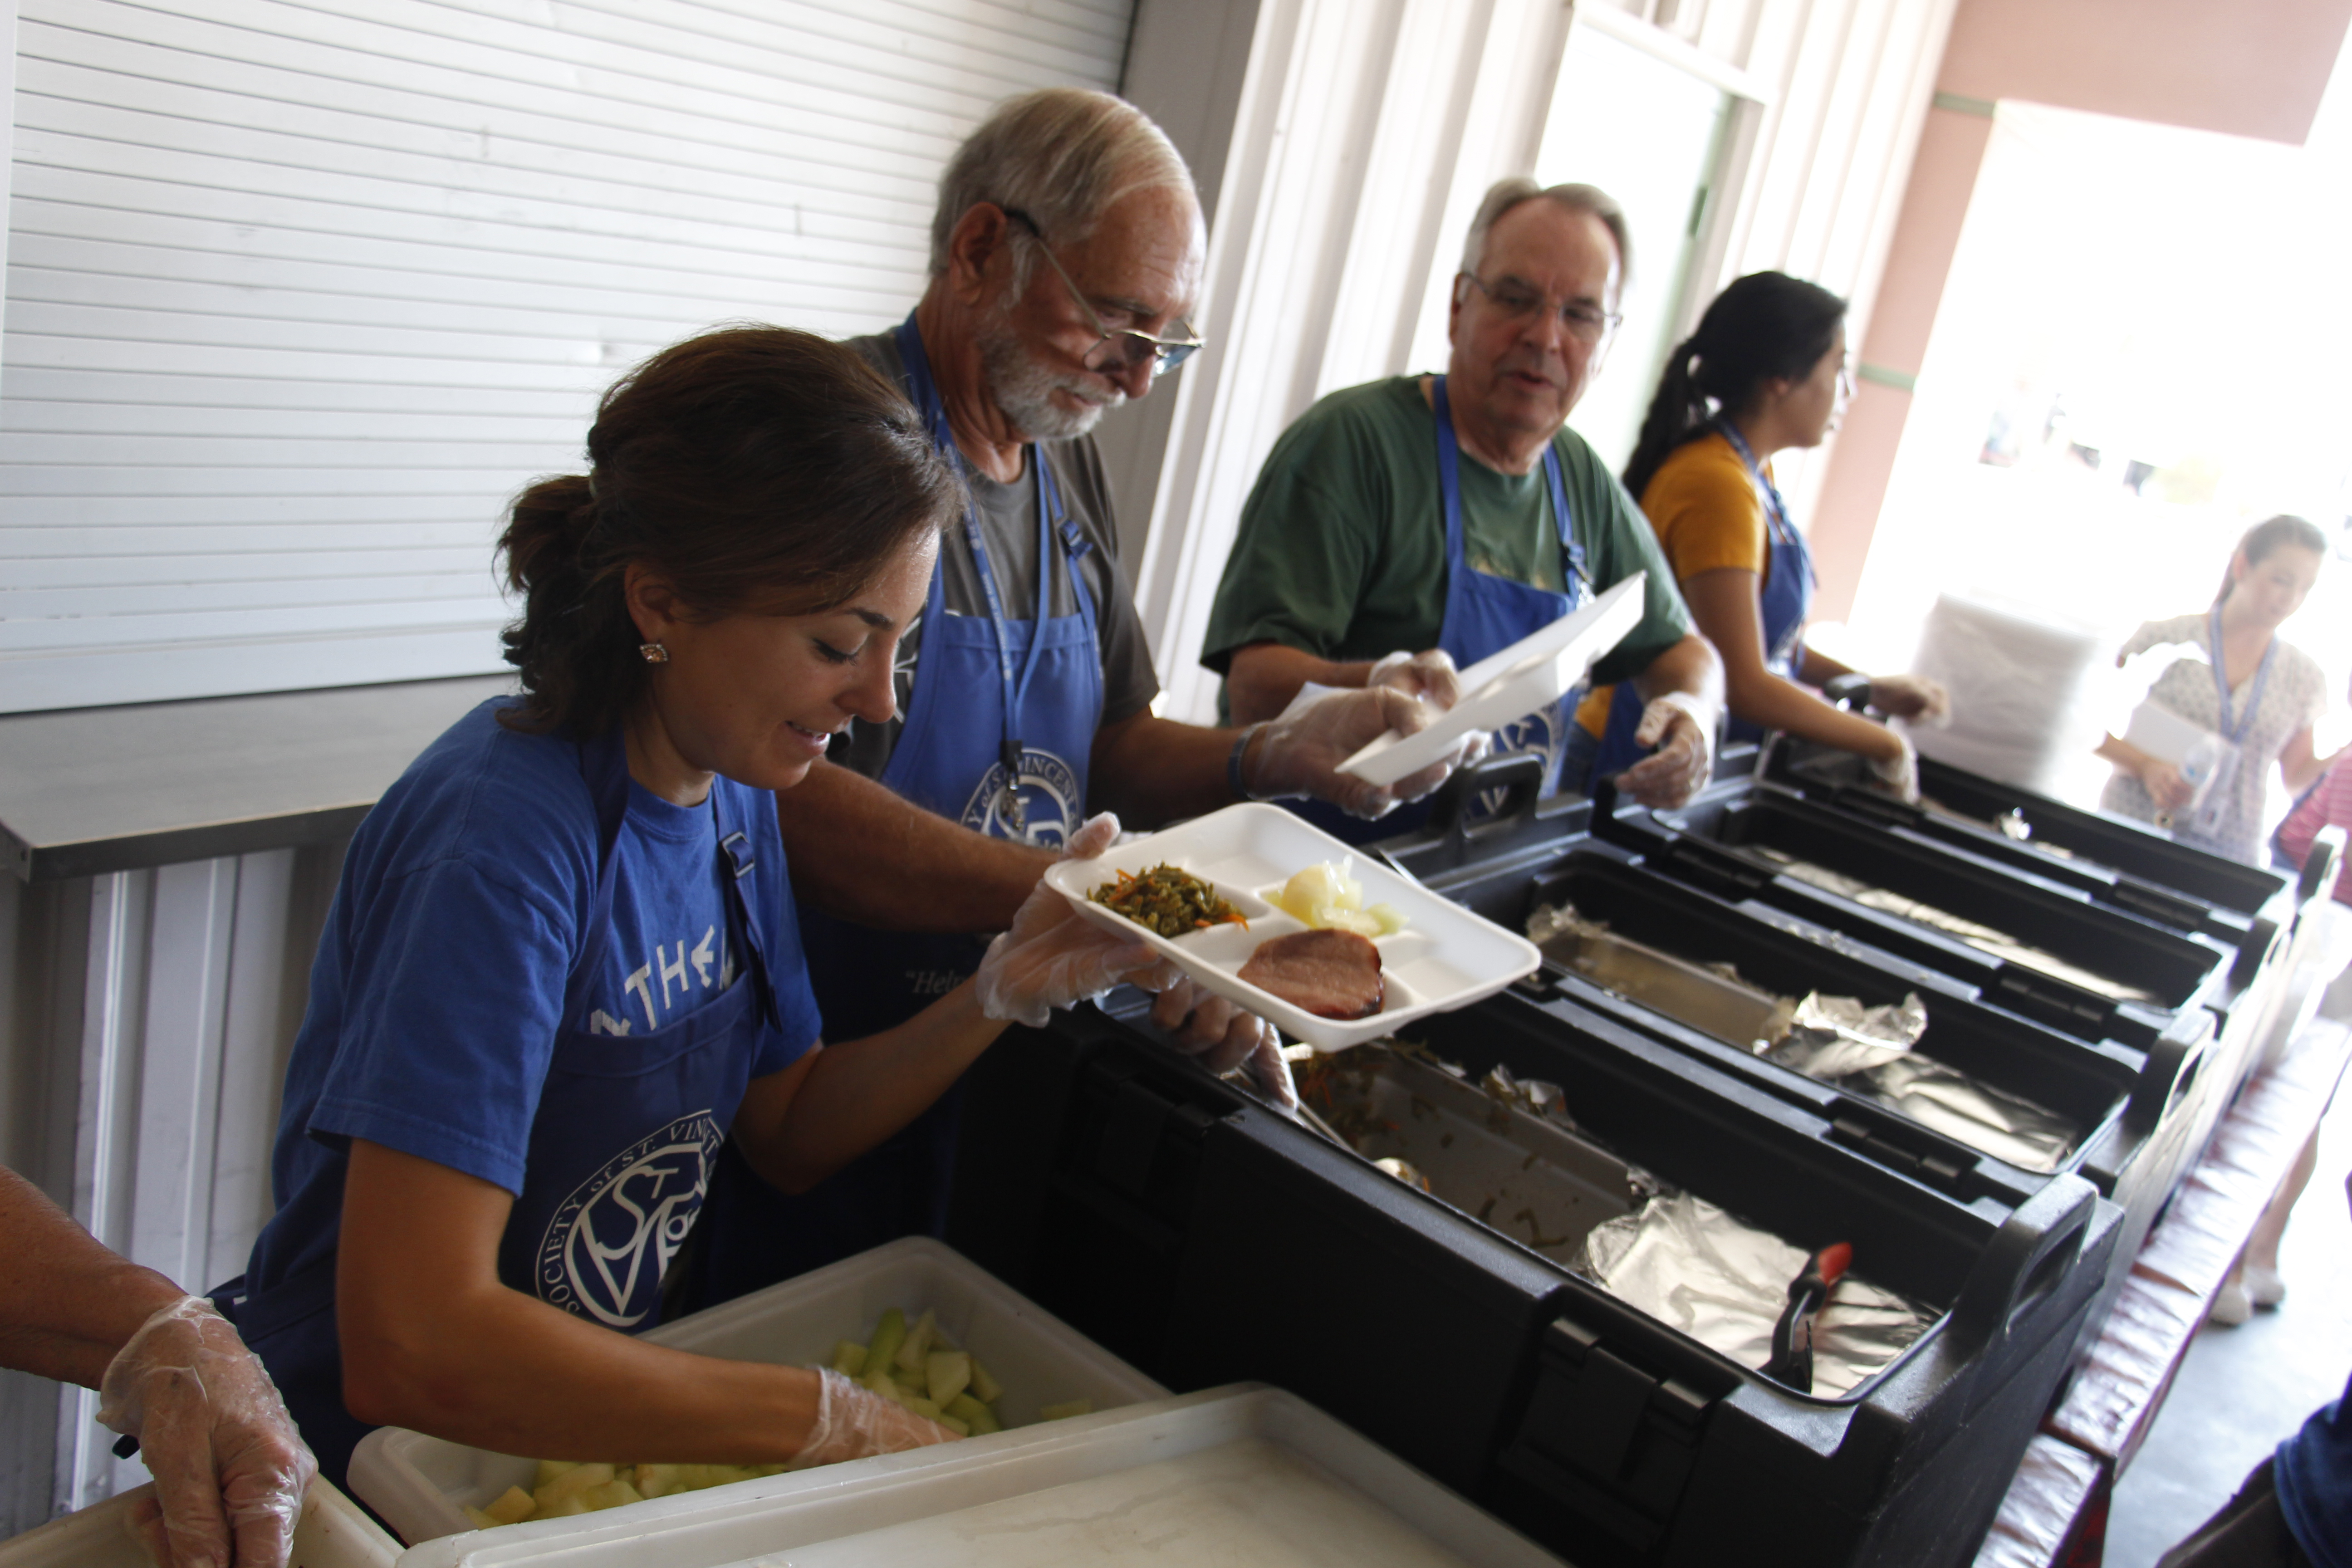 Vincentians serve clients a meal July 7 at their temporary space provided by Paz de Cristo. (Ambria Hammel/CATHOLIC SUN)